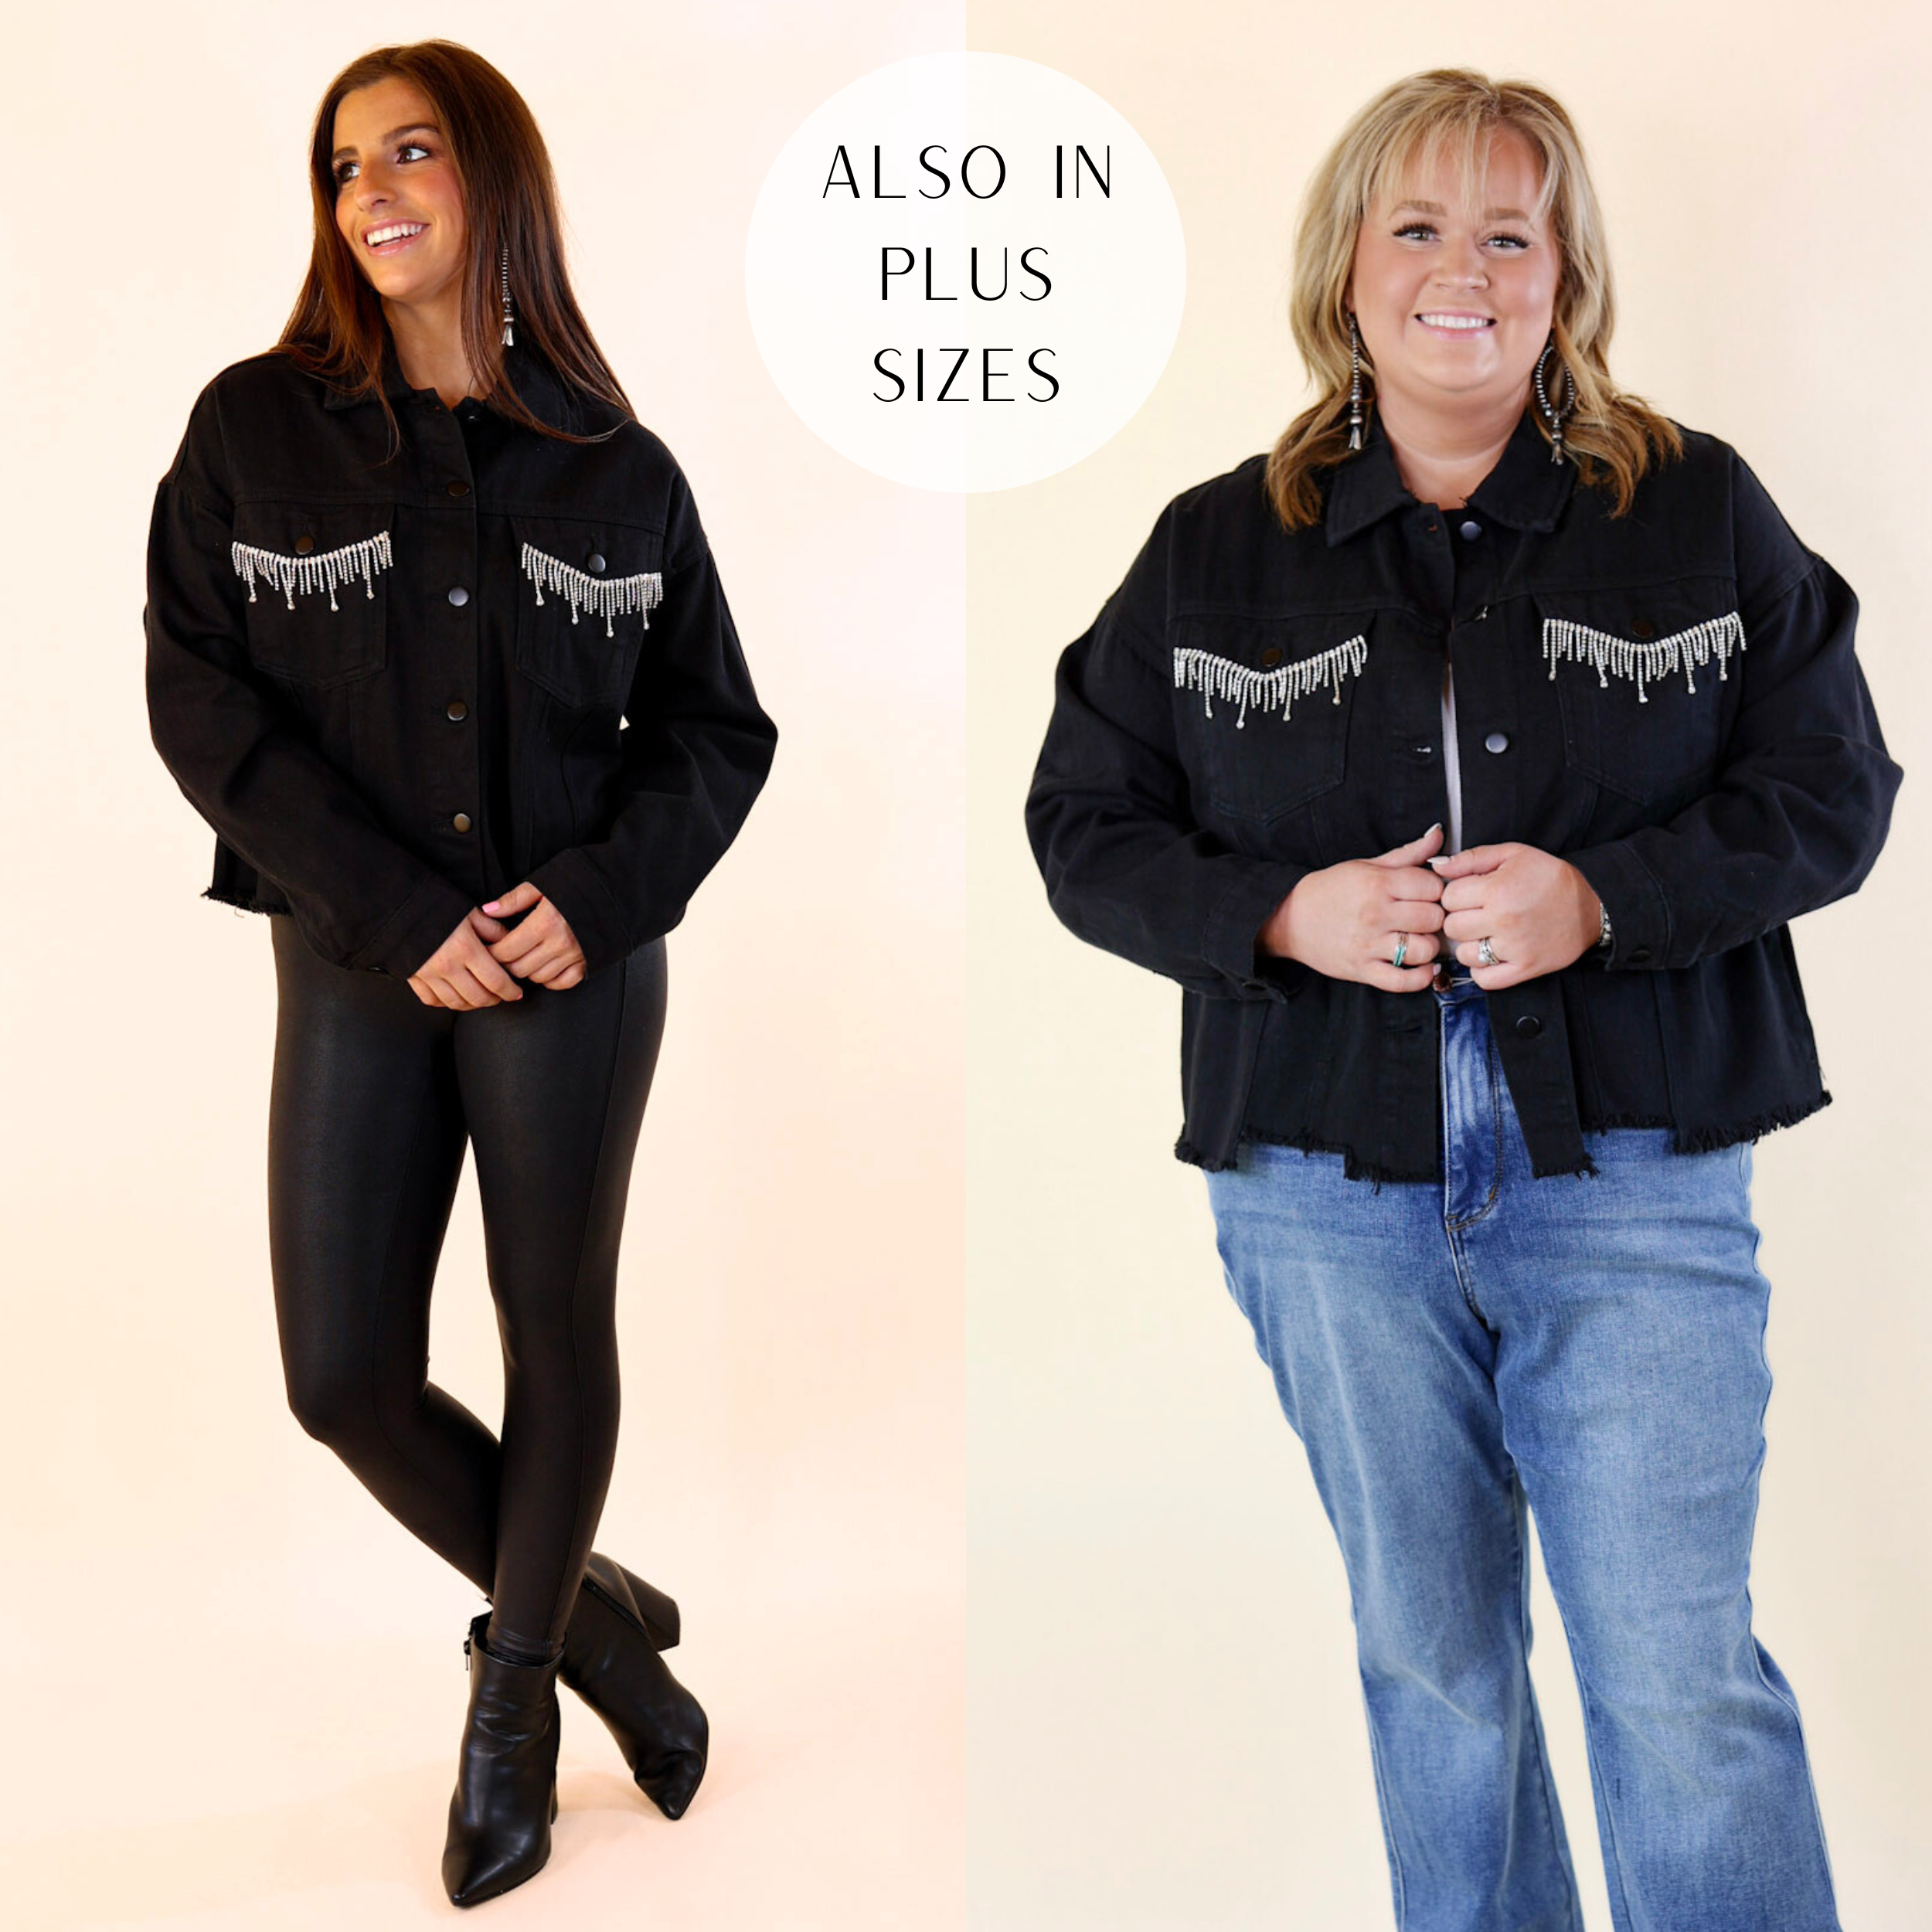 Models are wearing crystal fringe denim jacket Size small model is has it paired with black pants, black booties, and silver jewelry. Plus size model has it paired with light washed jeans and silver jewe;ry.